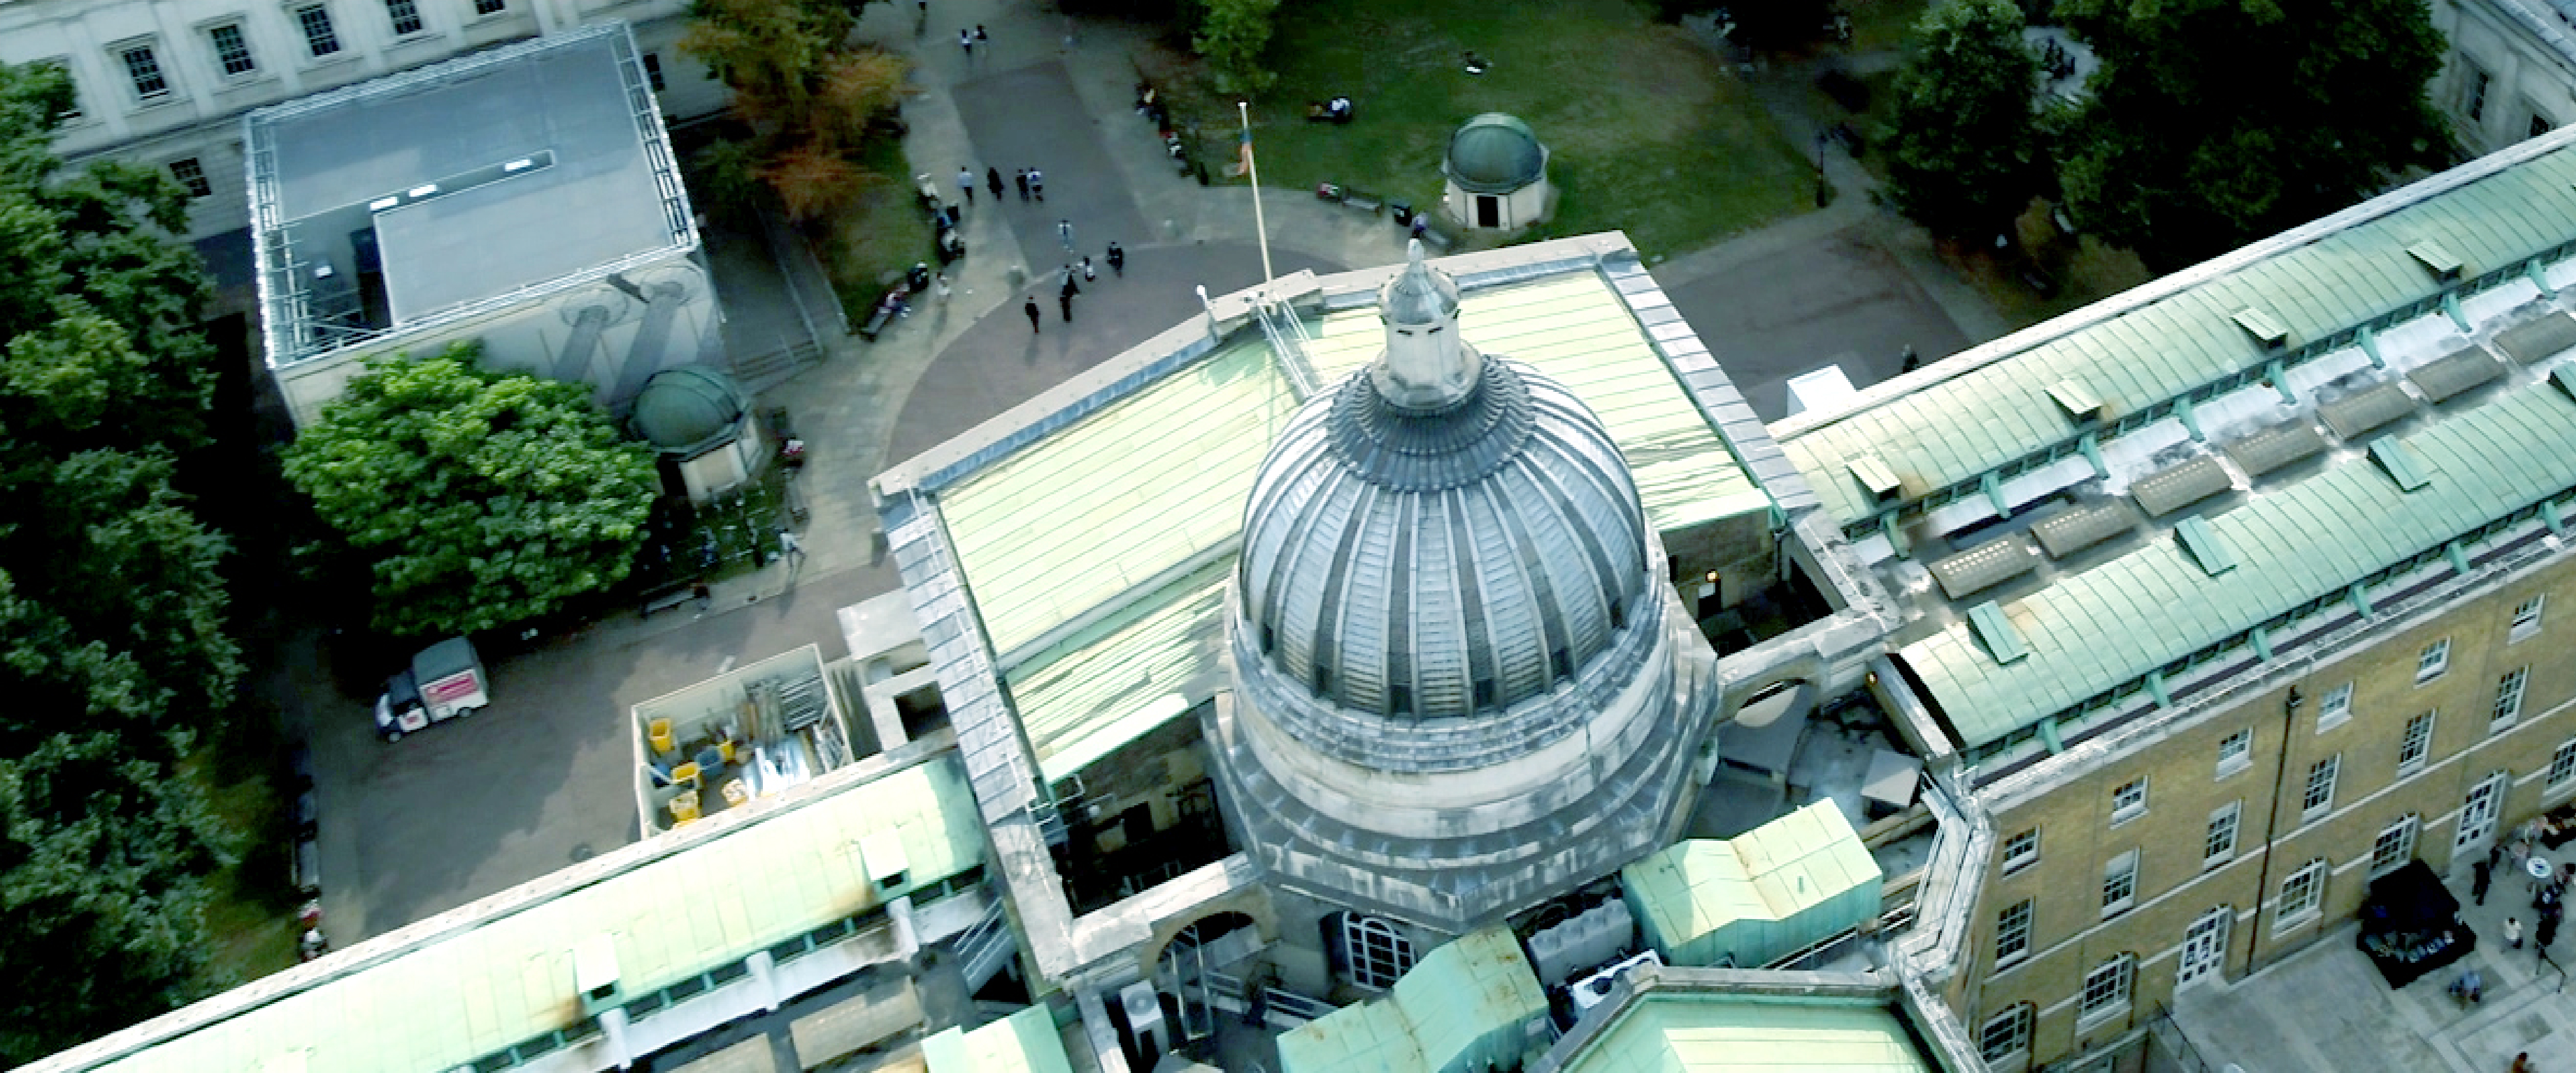 Aerial view of portico